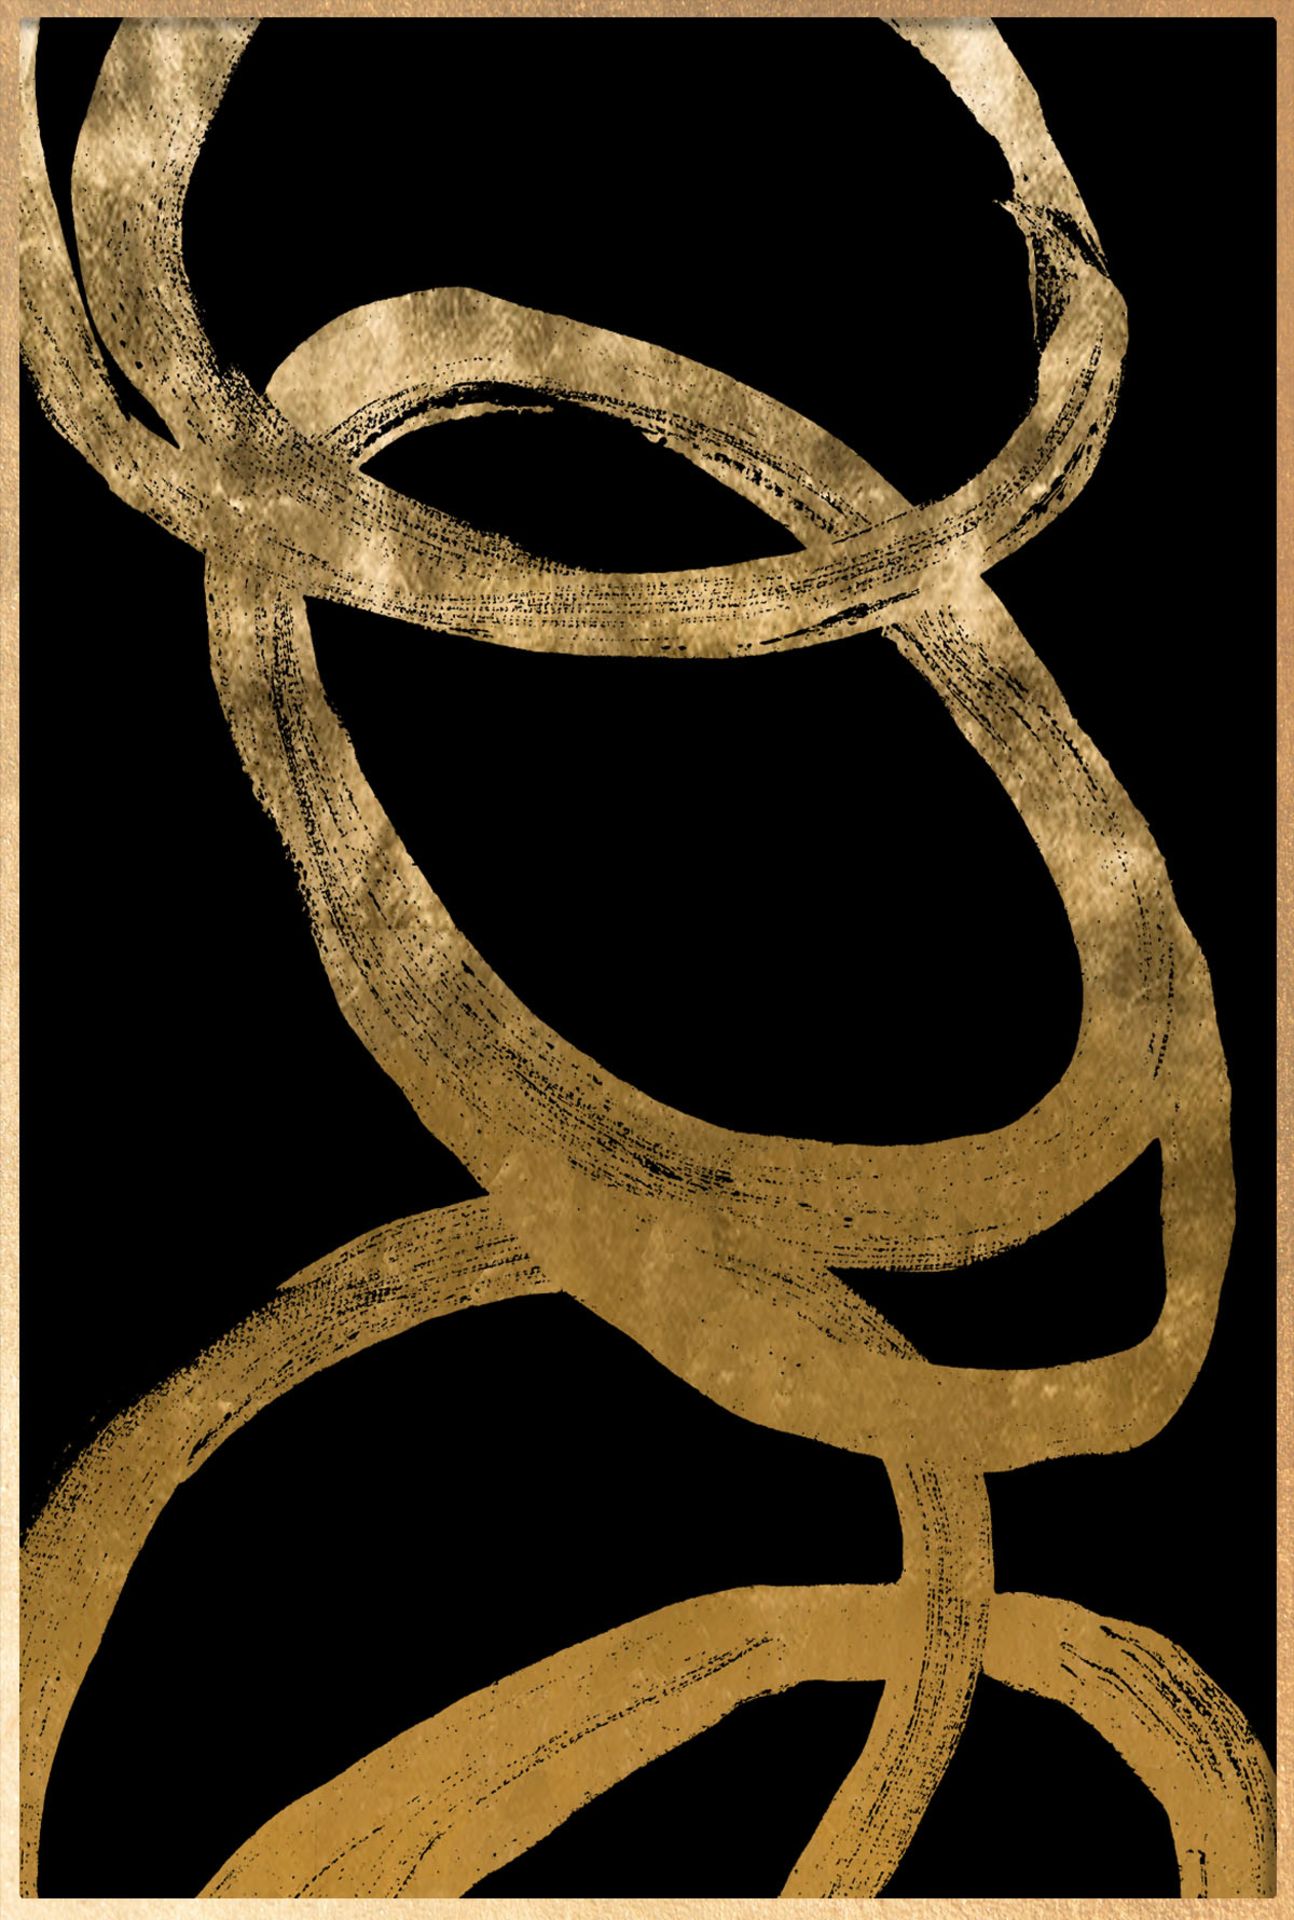 Zen Image 2 by Kesterport Artwork print on paper with acrylic pane .Aluminium frame in antique - Image 5 of 5